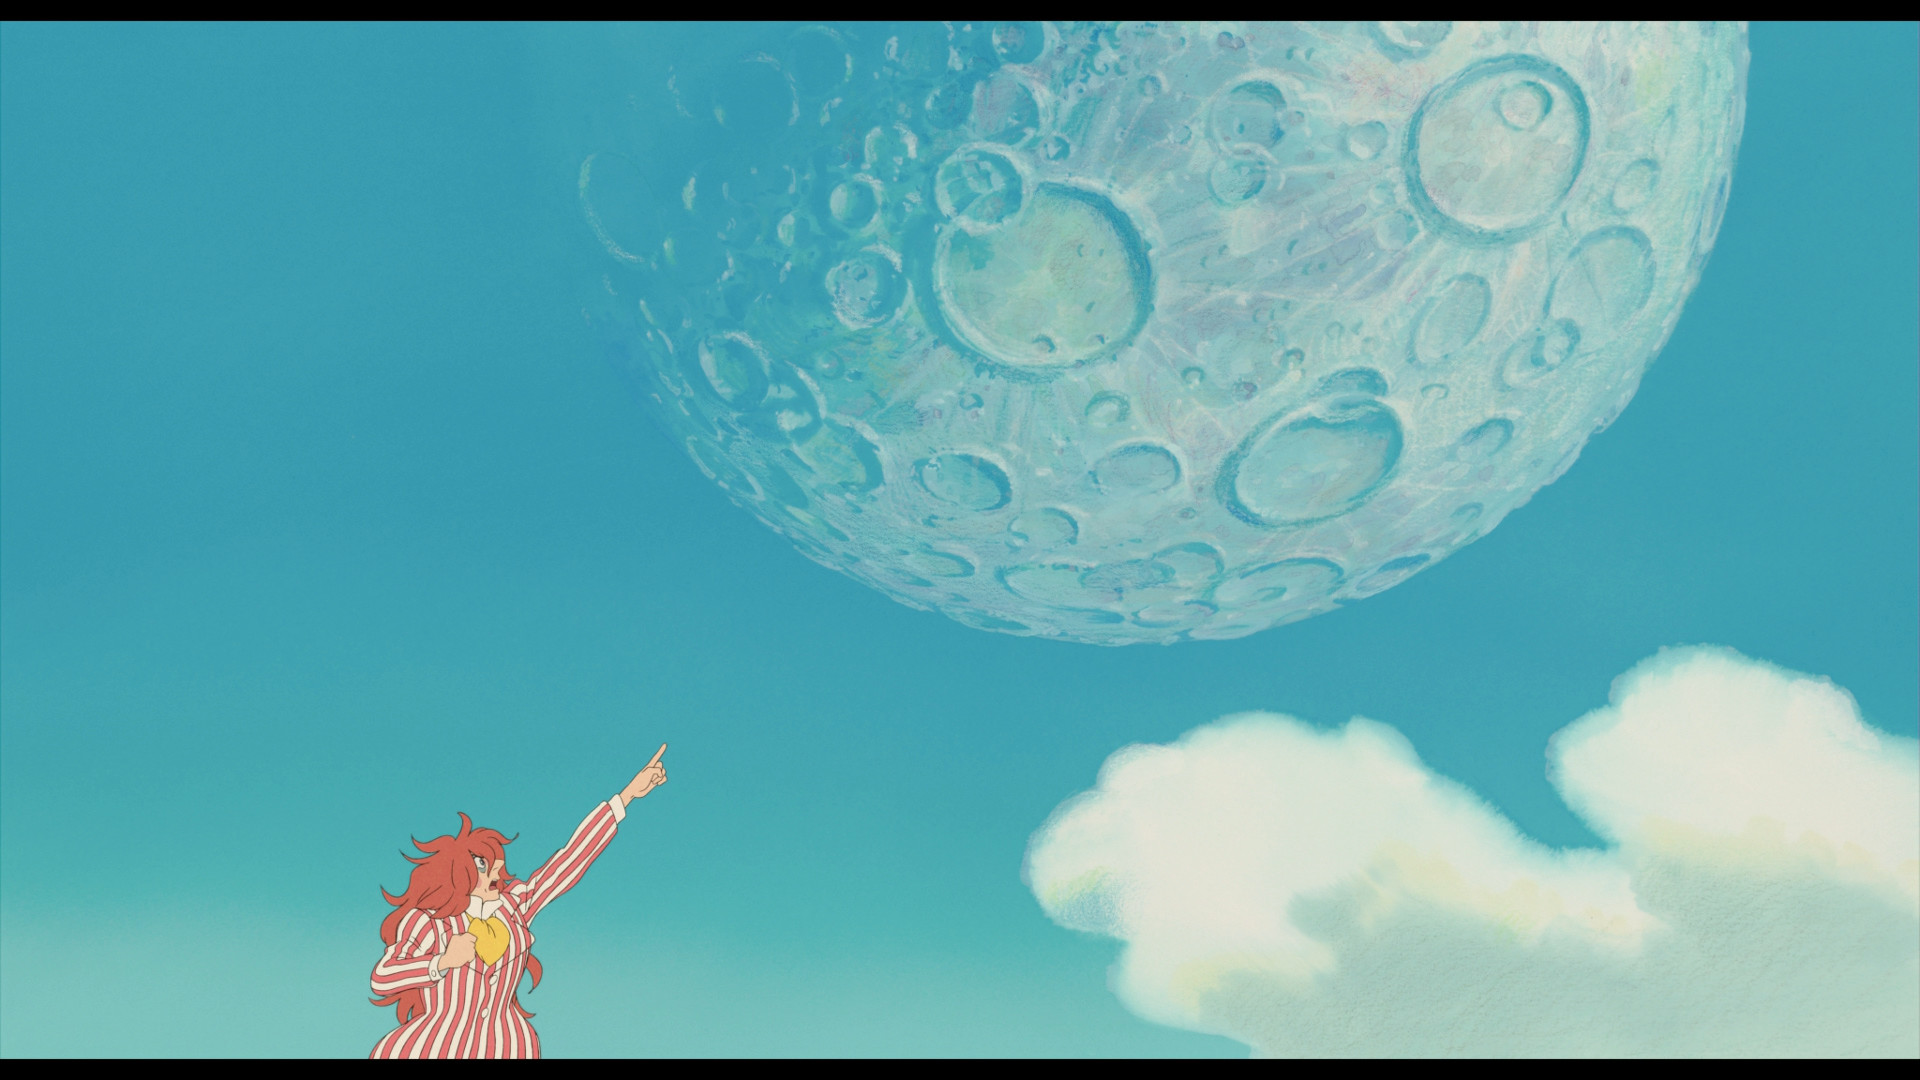 My Friend Made These Awesome Ponyo Wallpapers For My Phone   rghibli